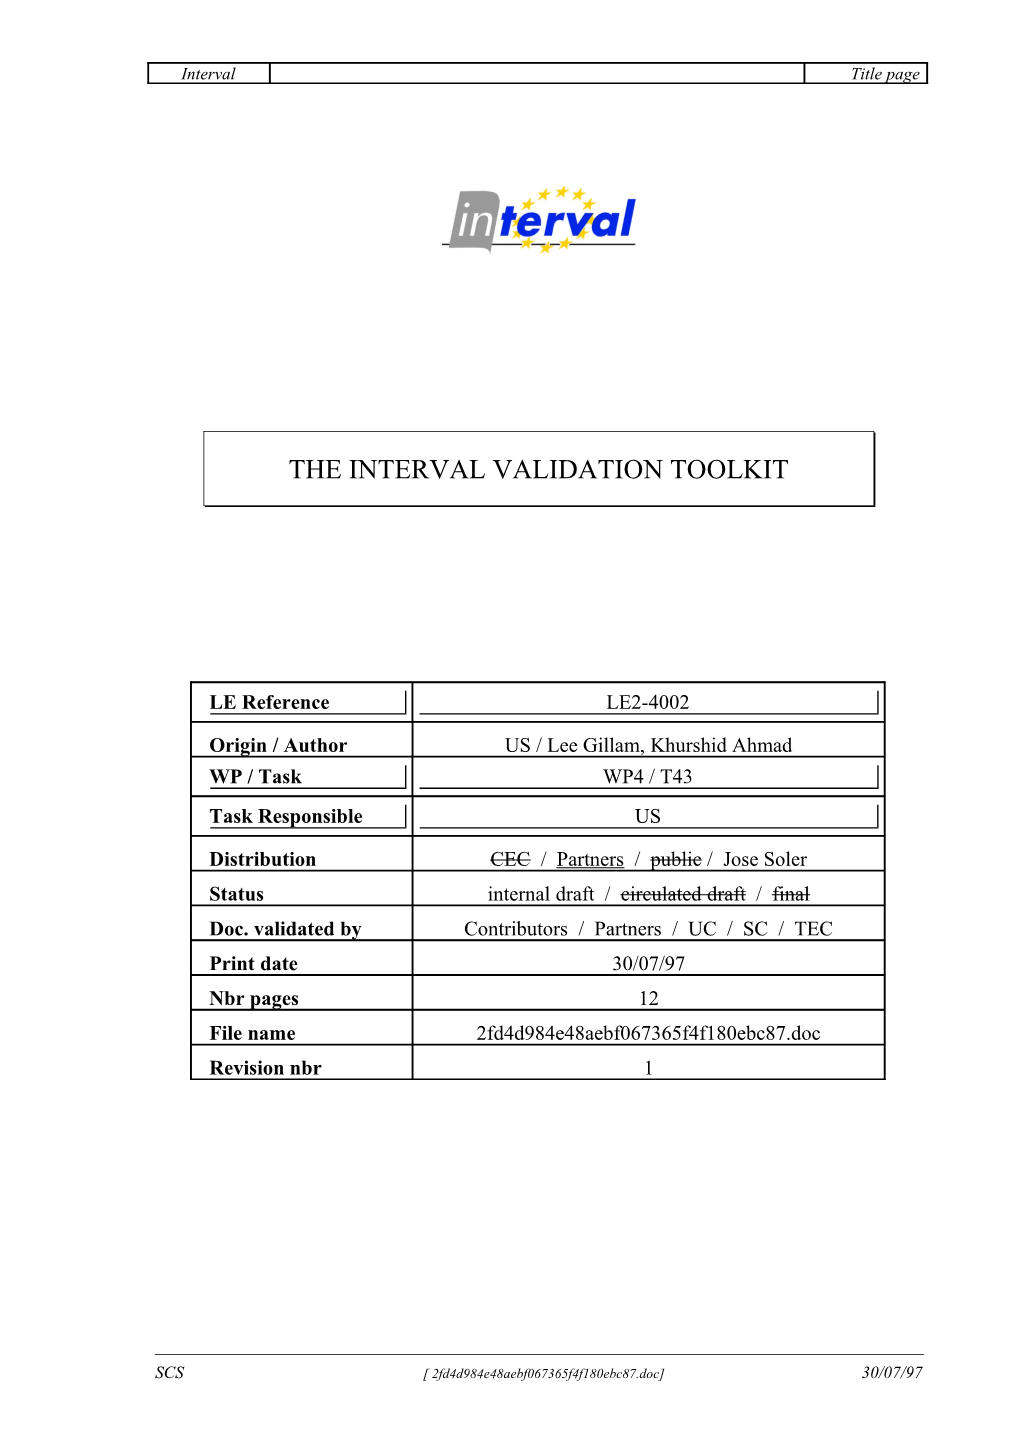 The Interval Validation Toolkit